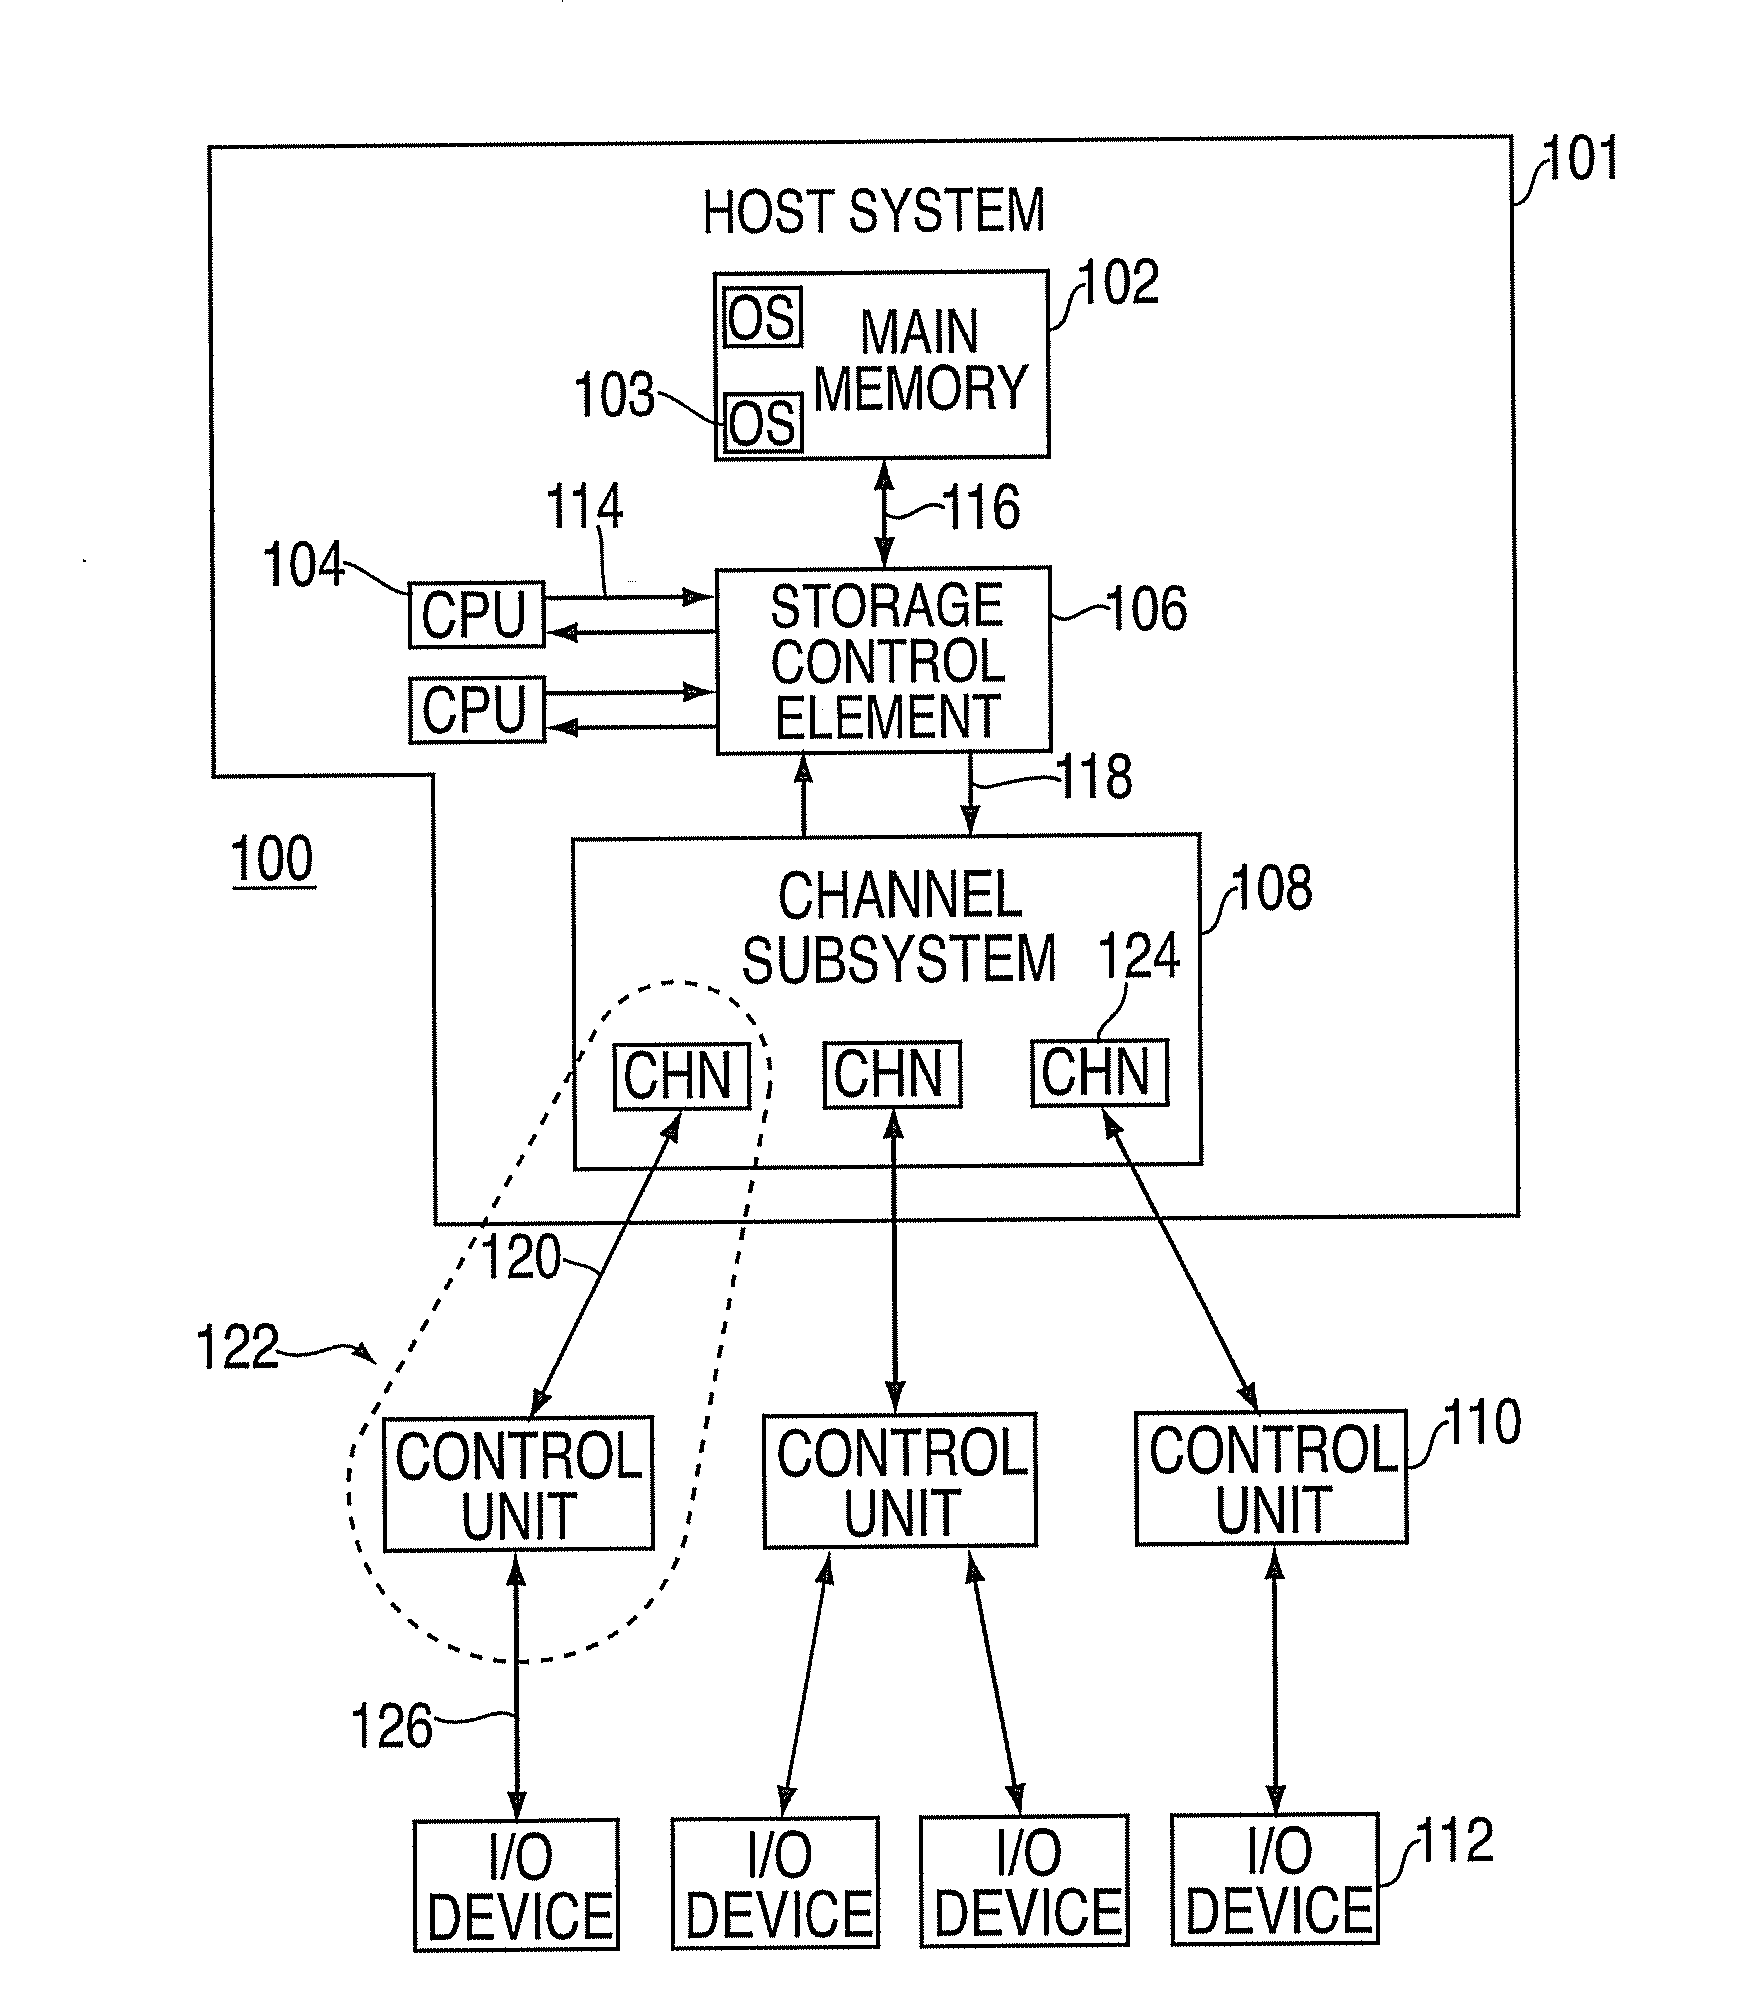 Exception condition determination at a control unit in an I/O processing system